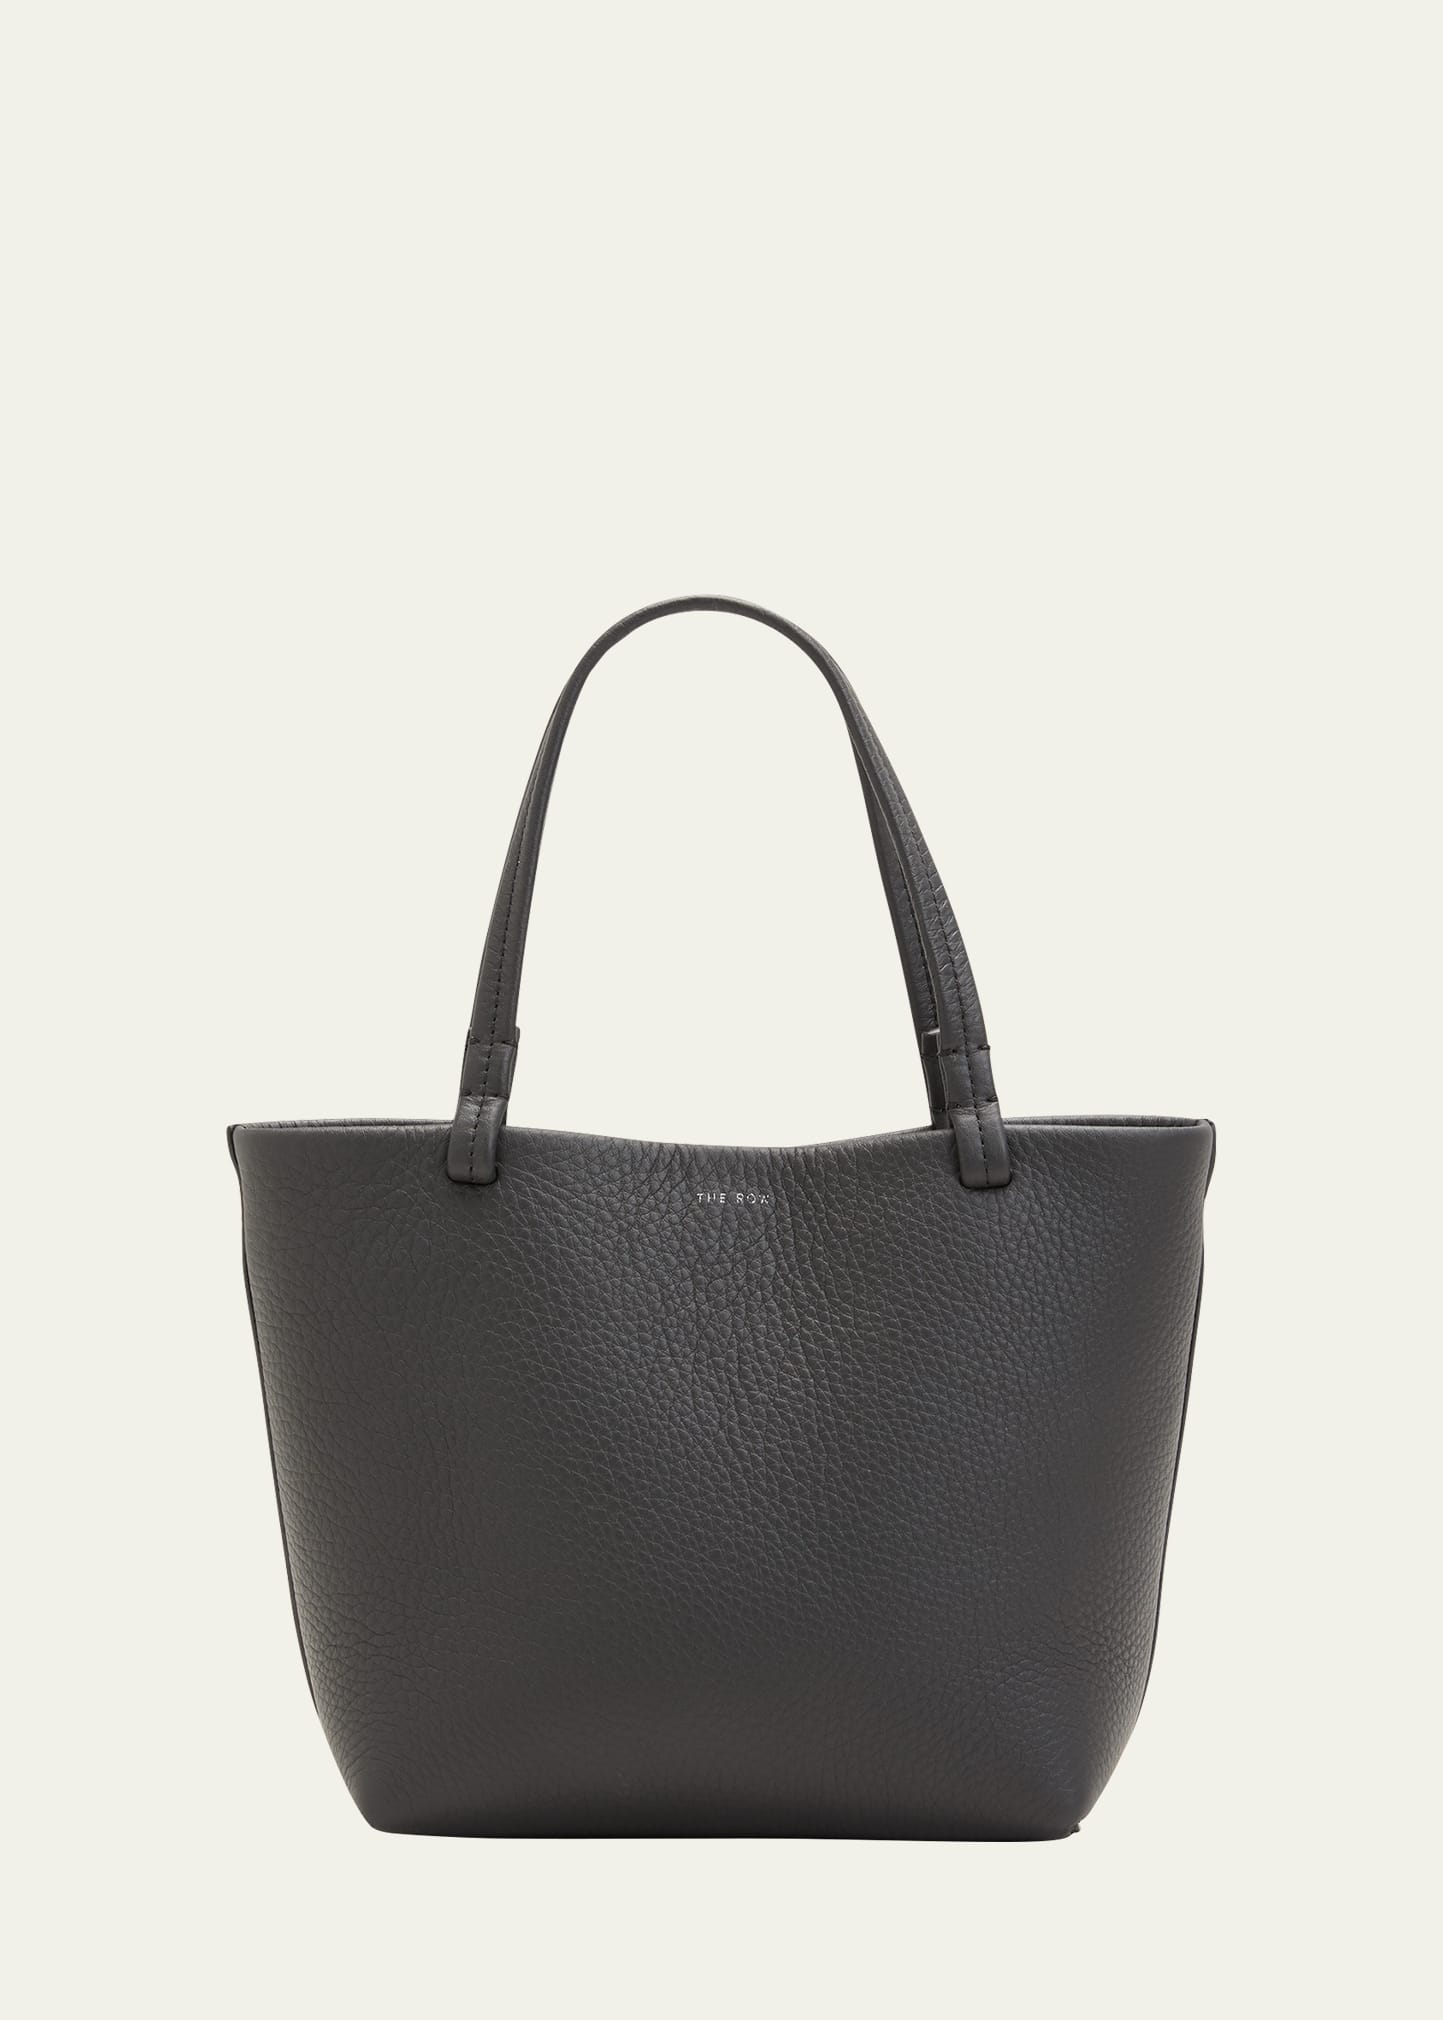 Park Tote Bag in Grained Calfskin